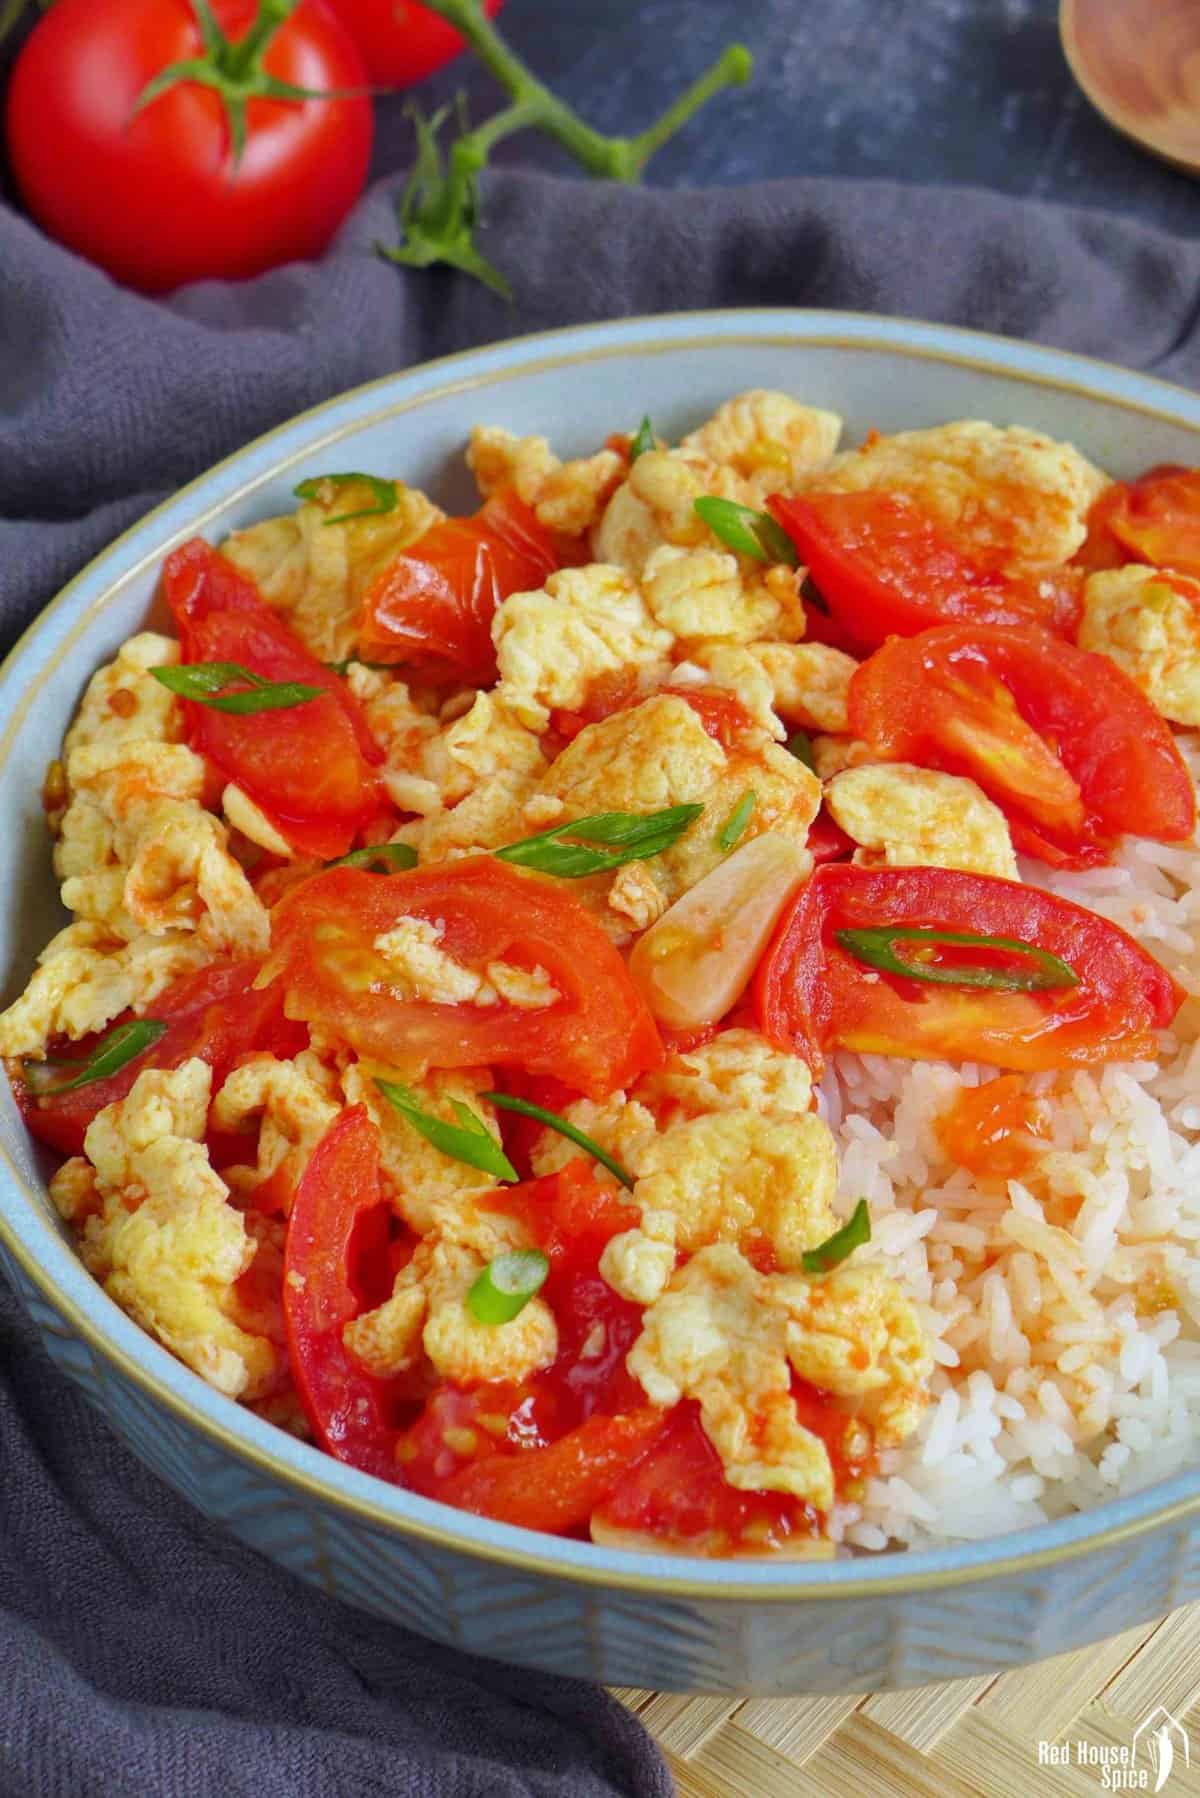 tomato and egg stir-fry over steamed rice.